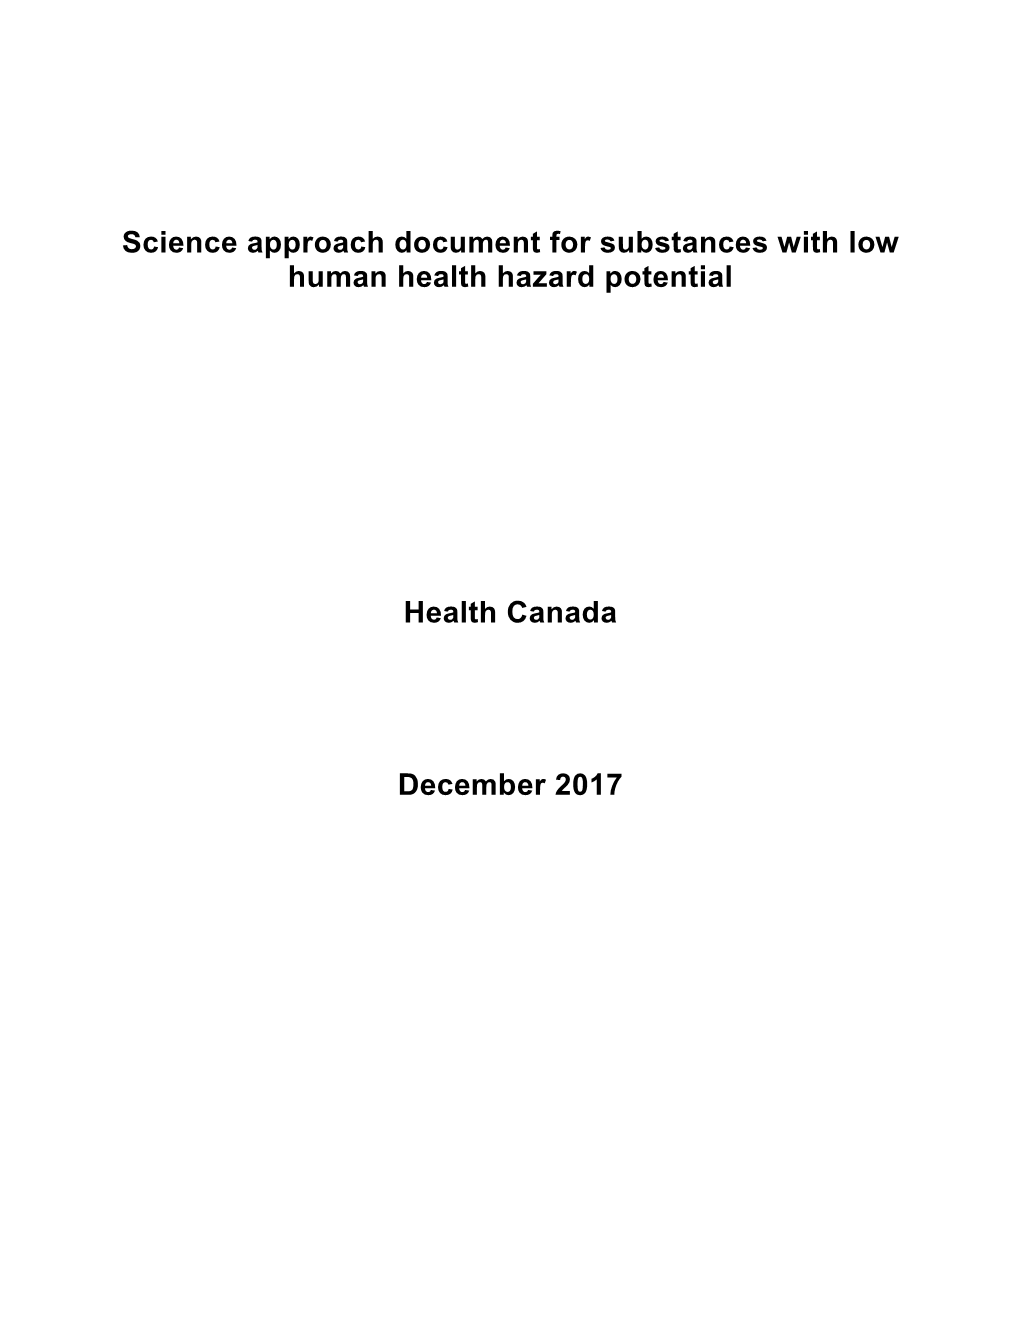 Science Approach Document for Substances with Low Human Health Hazard Potential